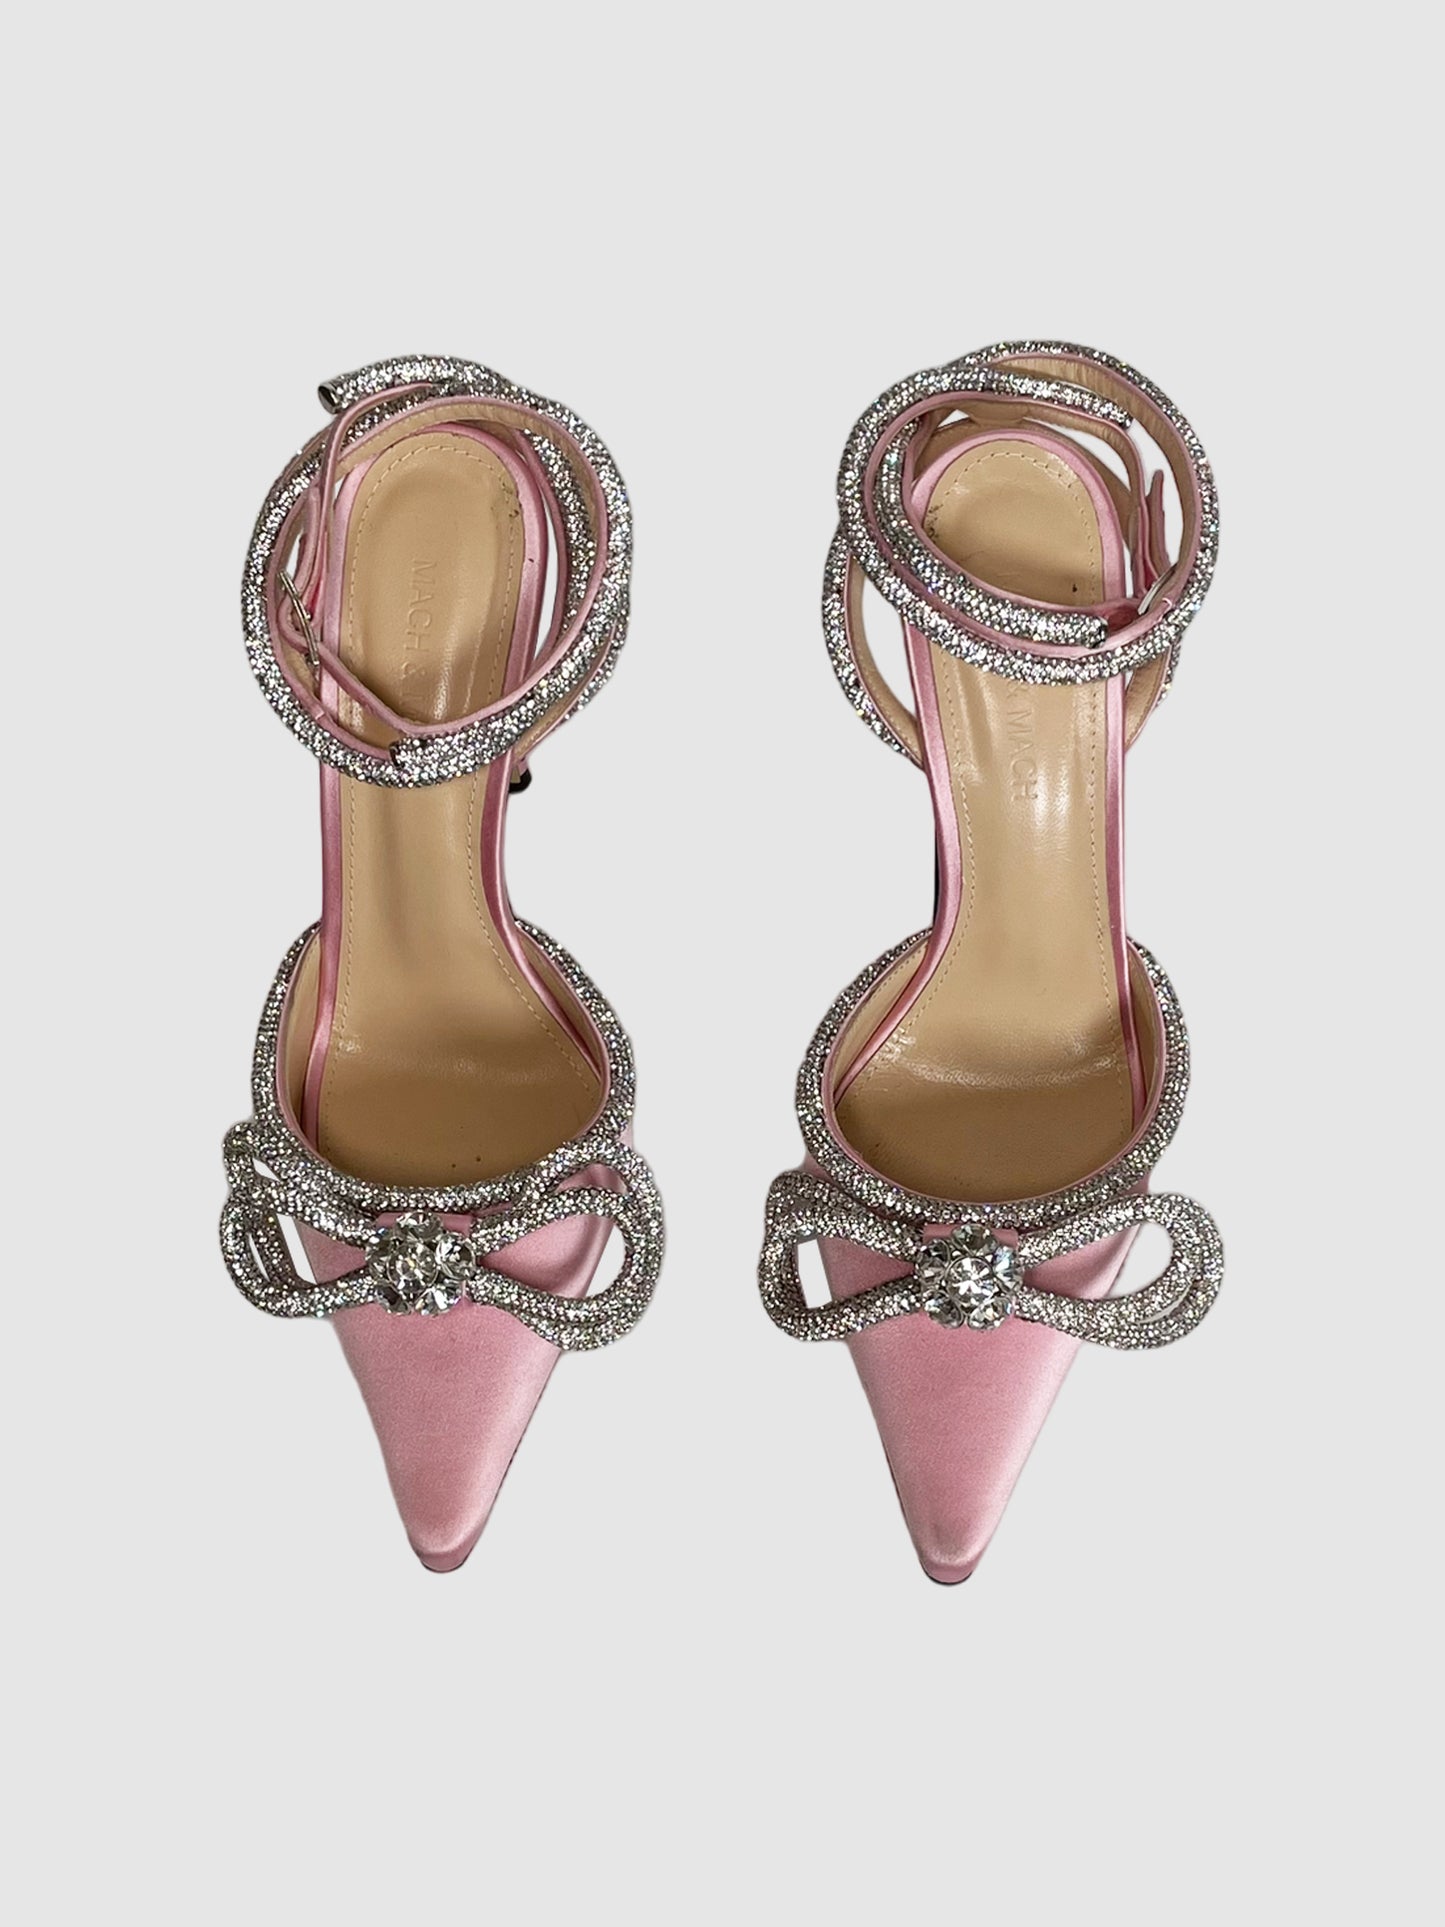 Mach & Mach Double Bow 110 Crystal and Silk-Satin Pumps - Size 37